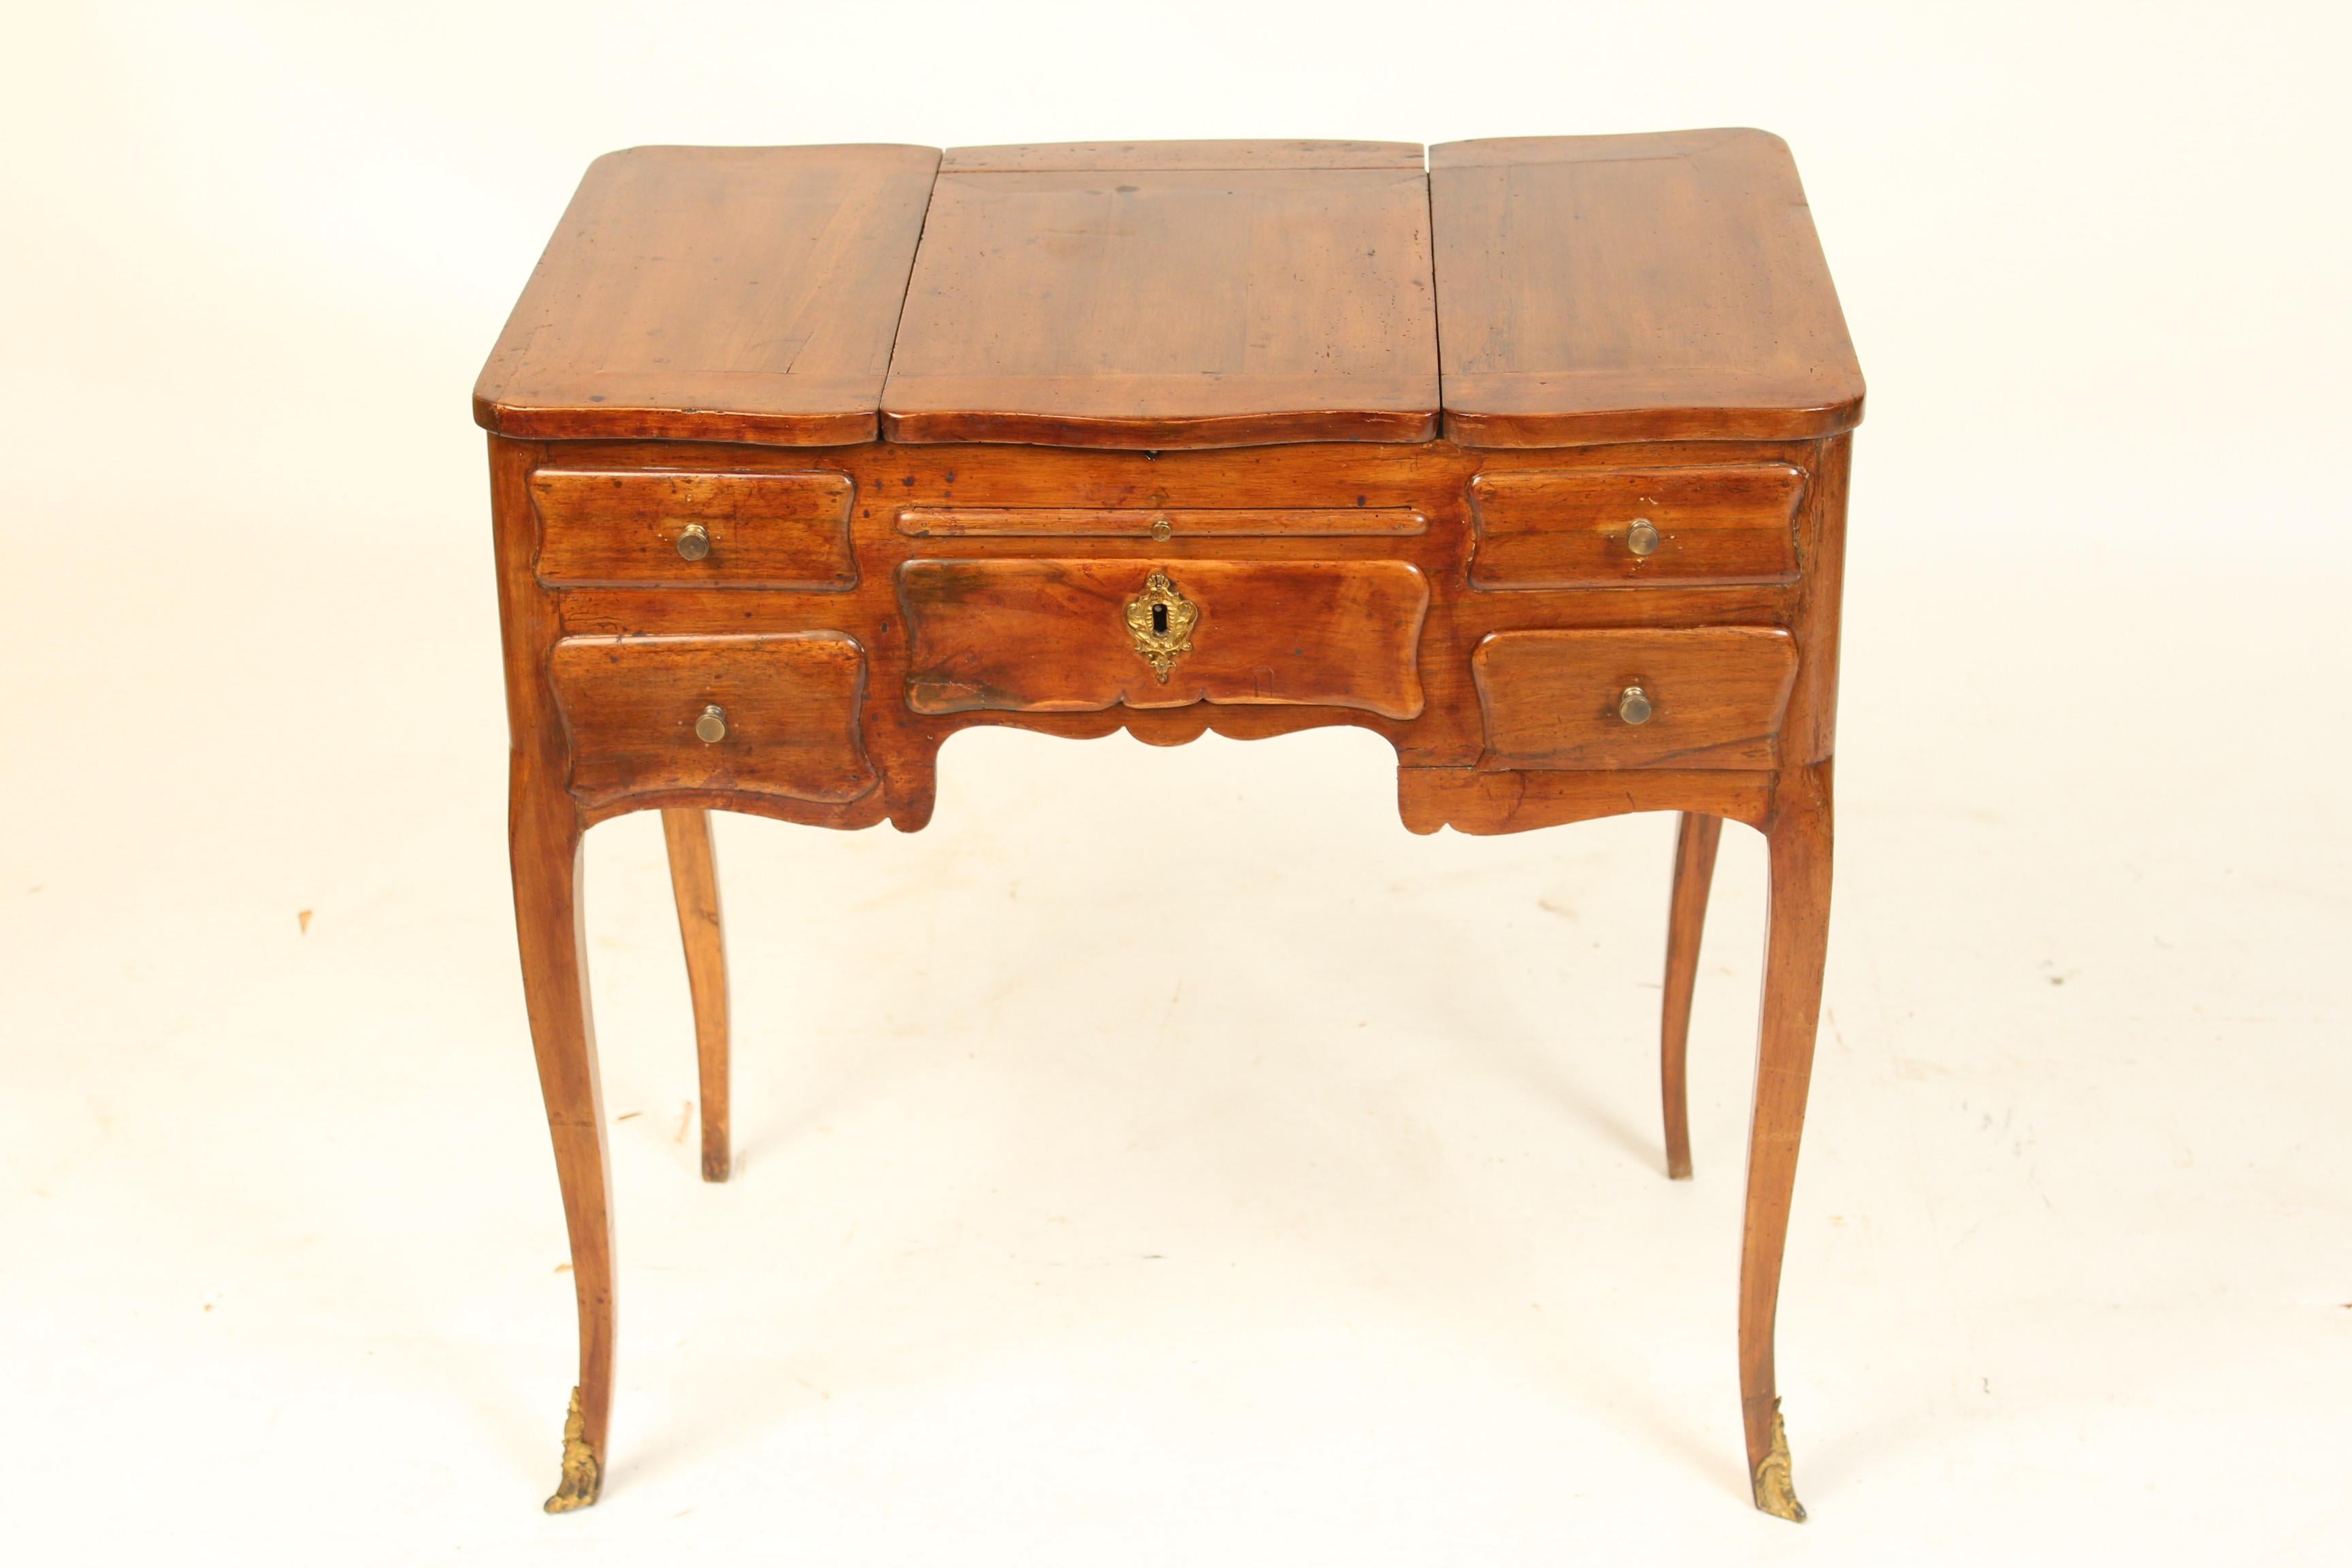 Louis XV provincial walnut poudre / occasional table, late 18th century. The walnut on this table has an excellent old patina.